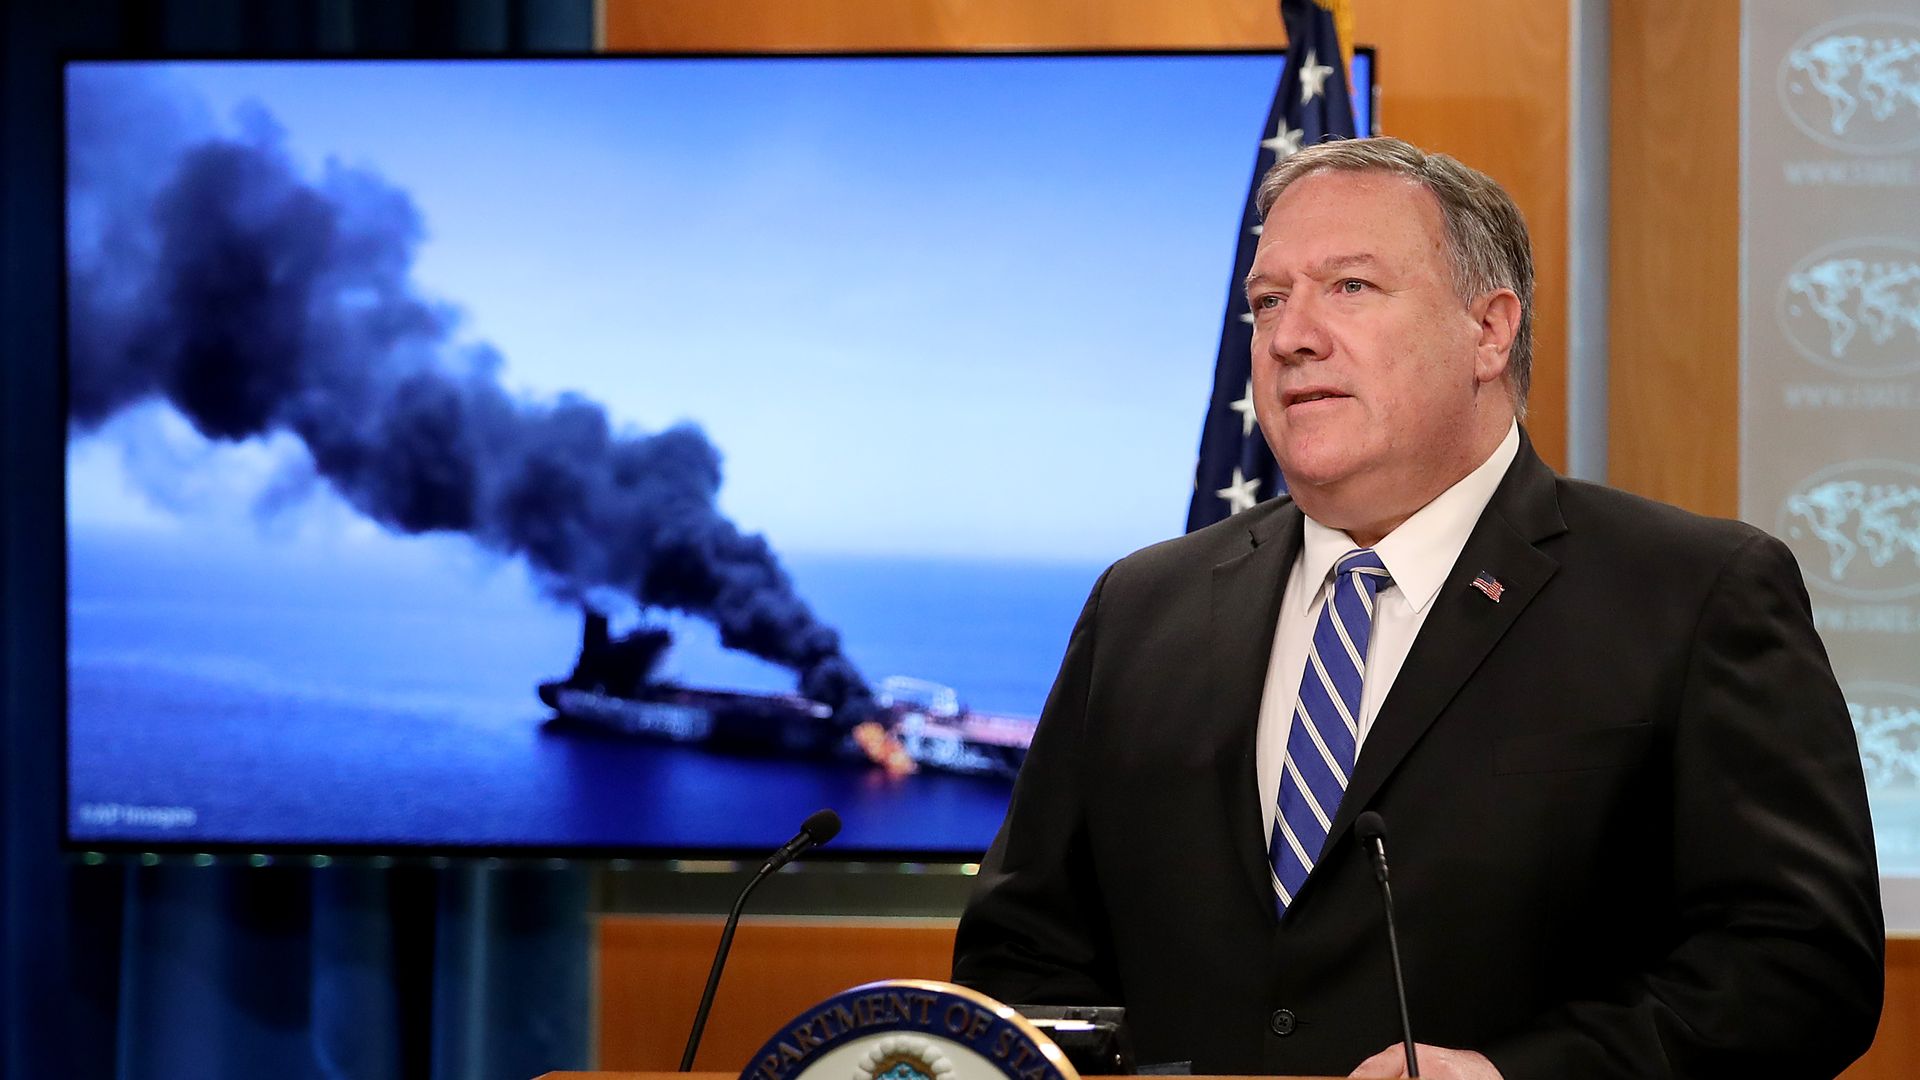 Sec. of Stat Mike Pompeo speaking about attacks on oil tankers